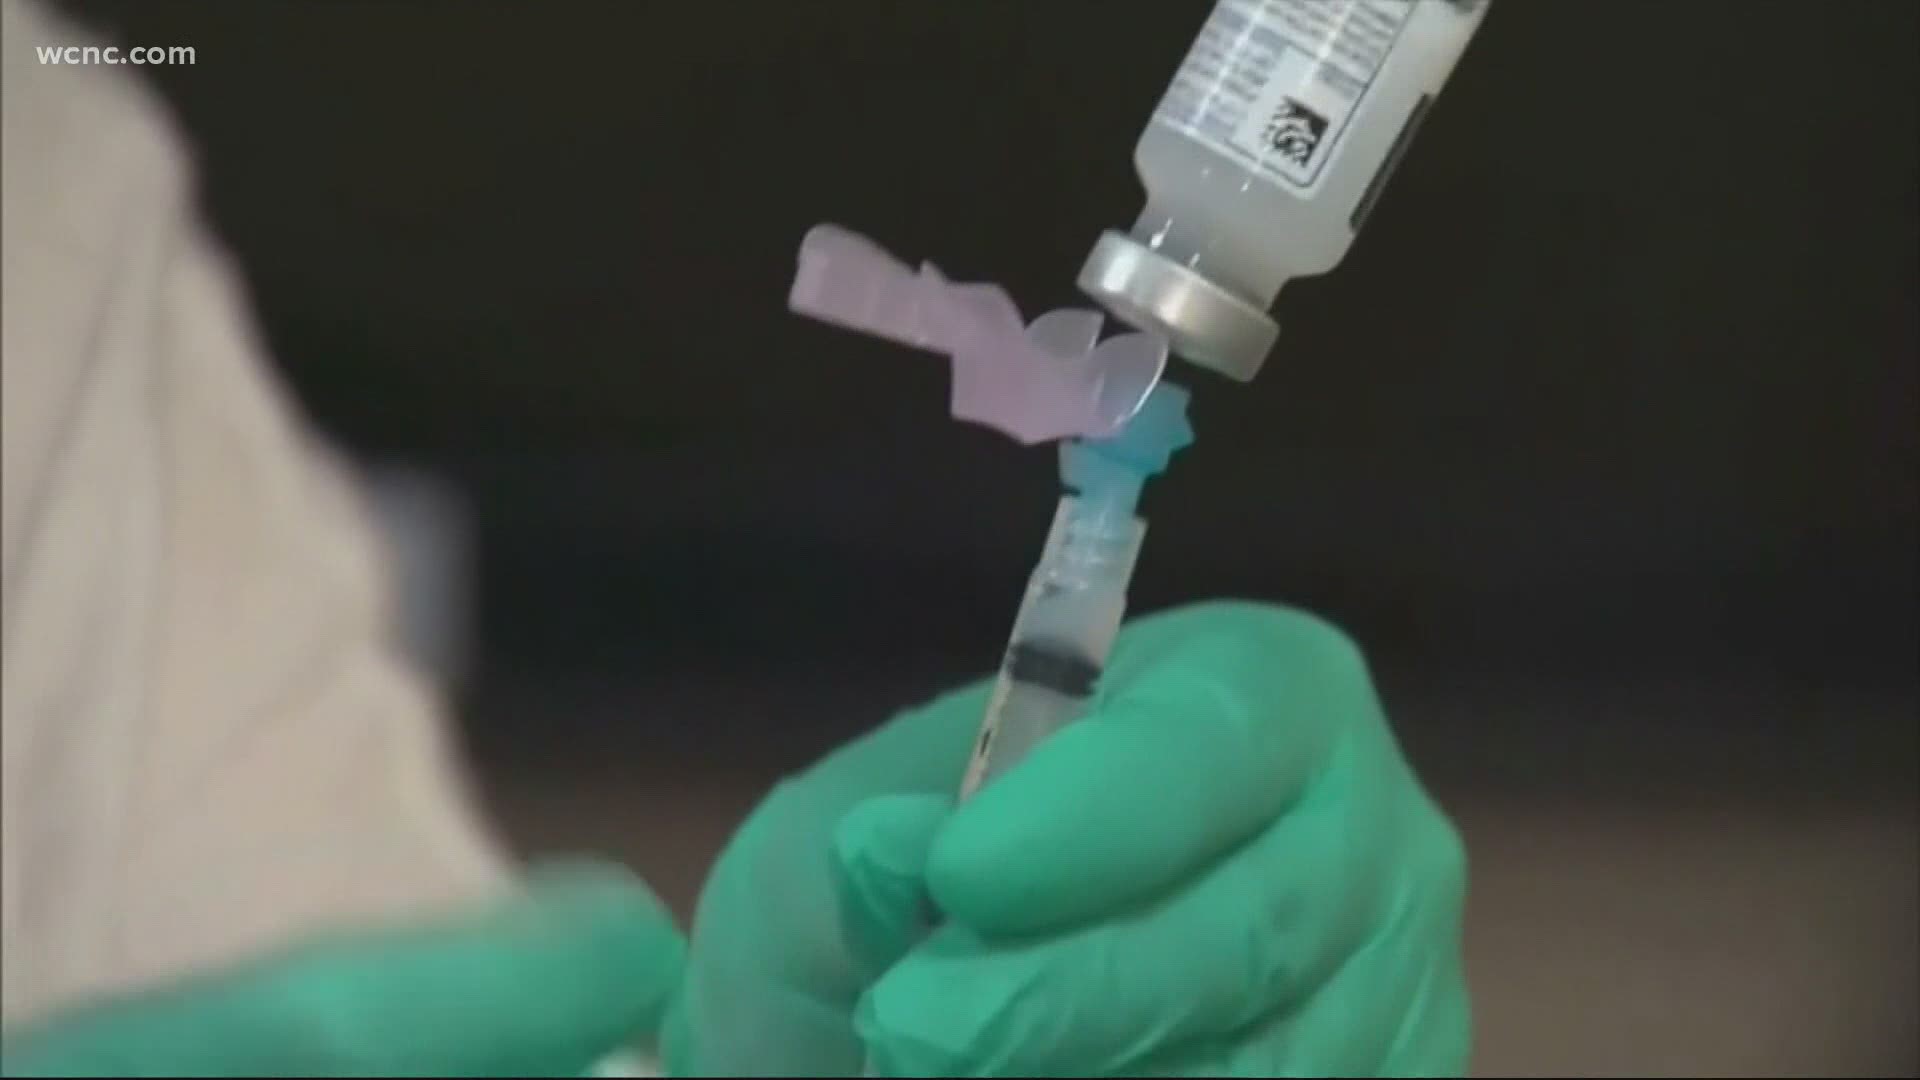 The Palmetto State is offering up all three available vaccines, including doses of Johnson & Johnson's one-shot vaccine.